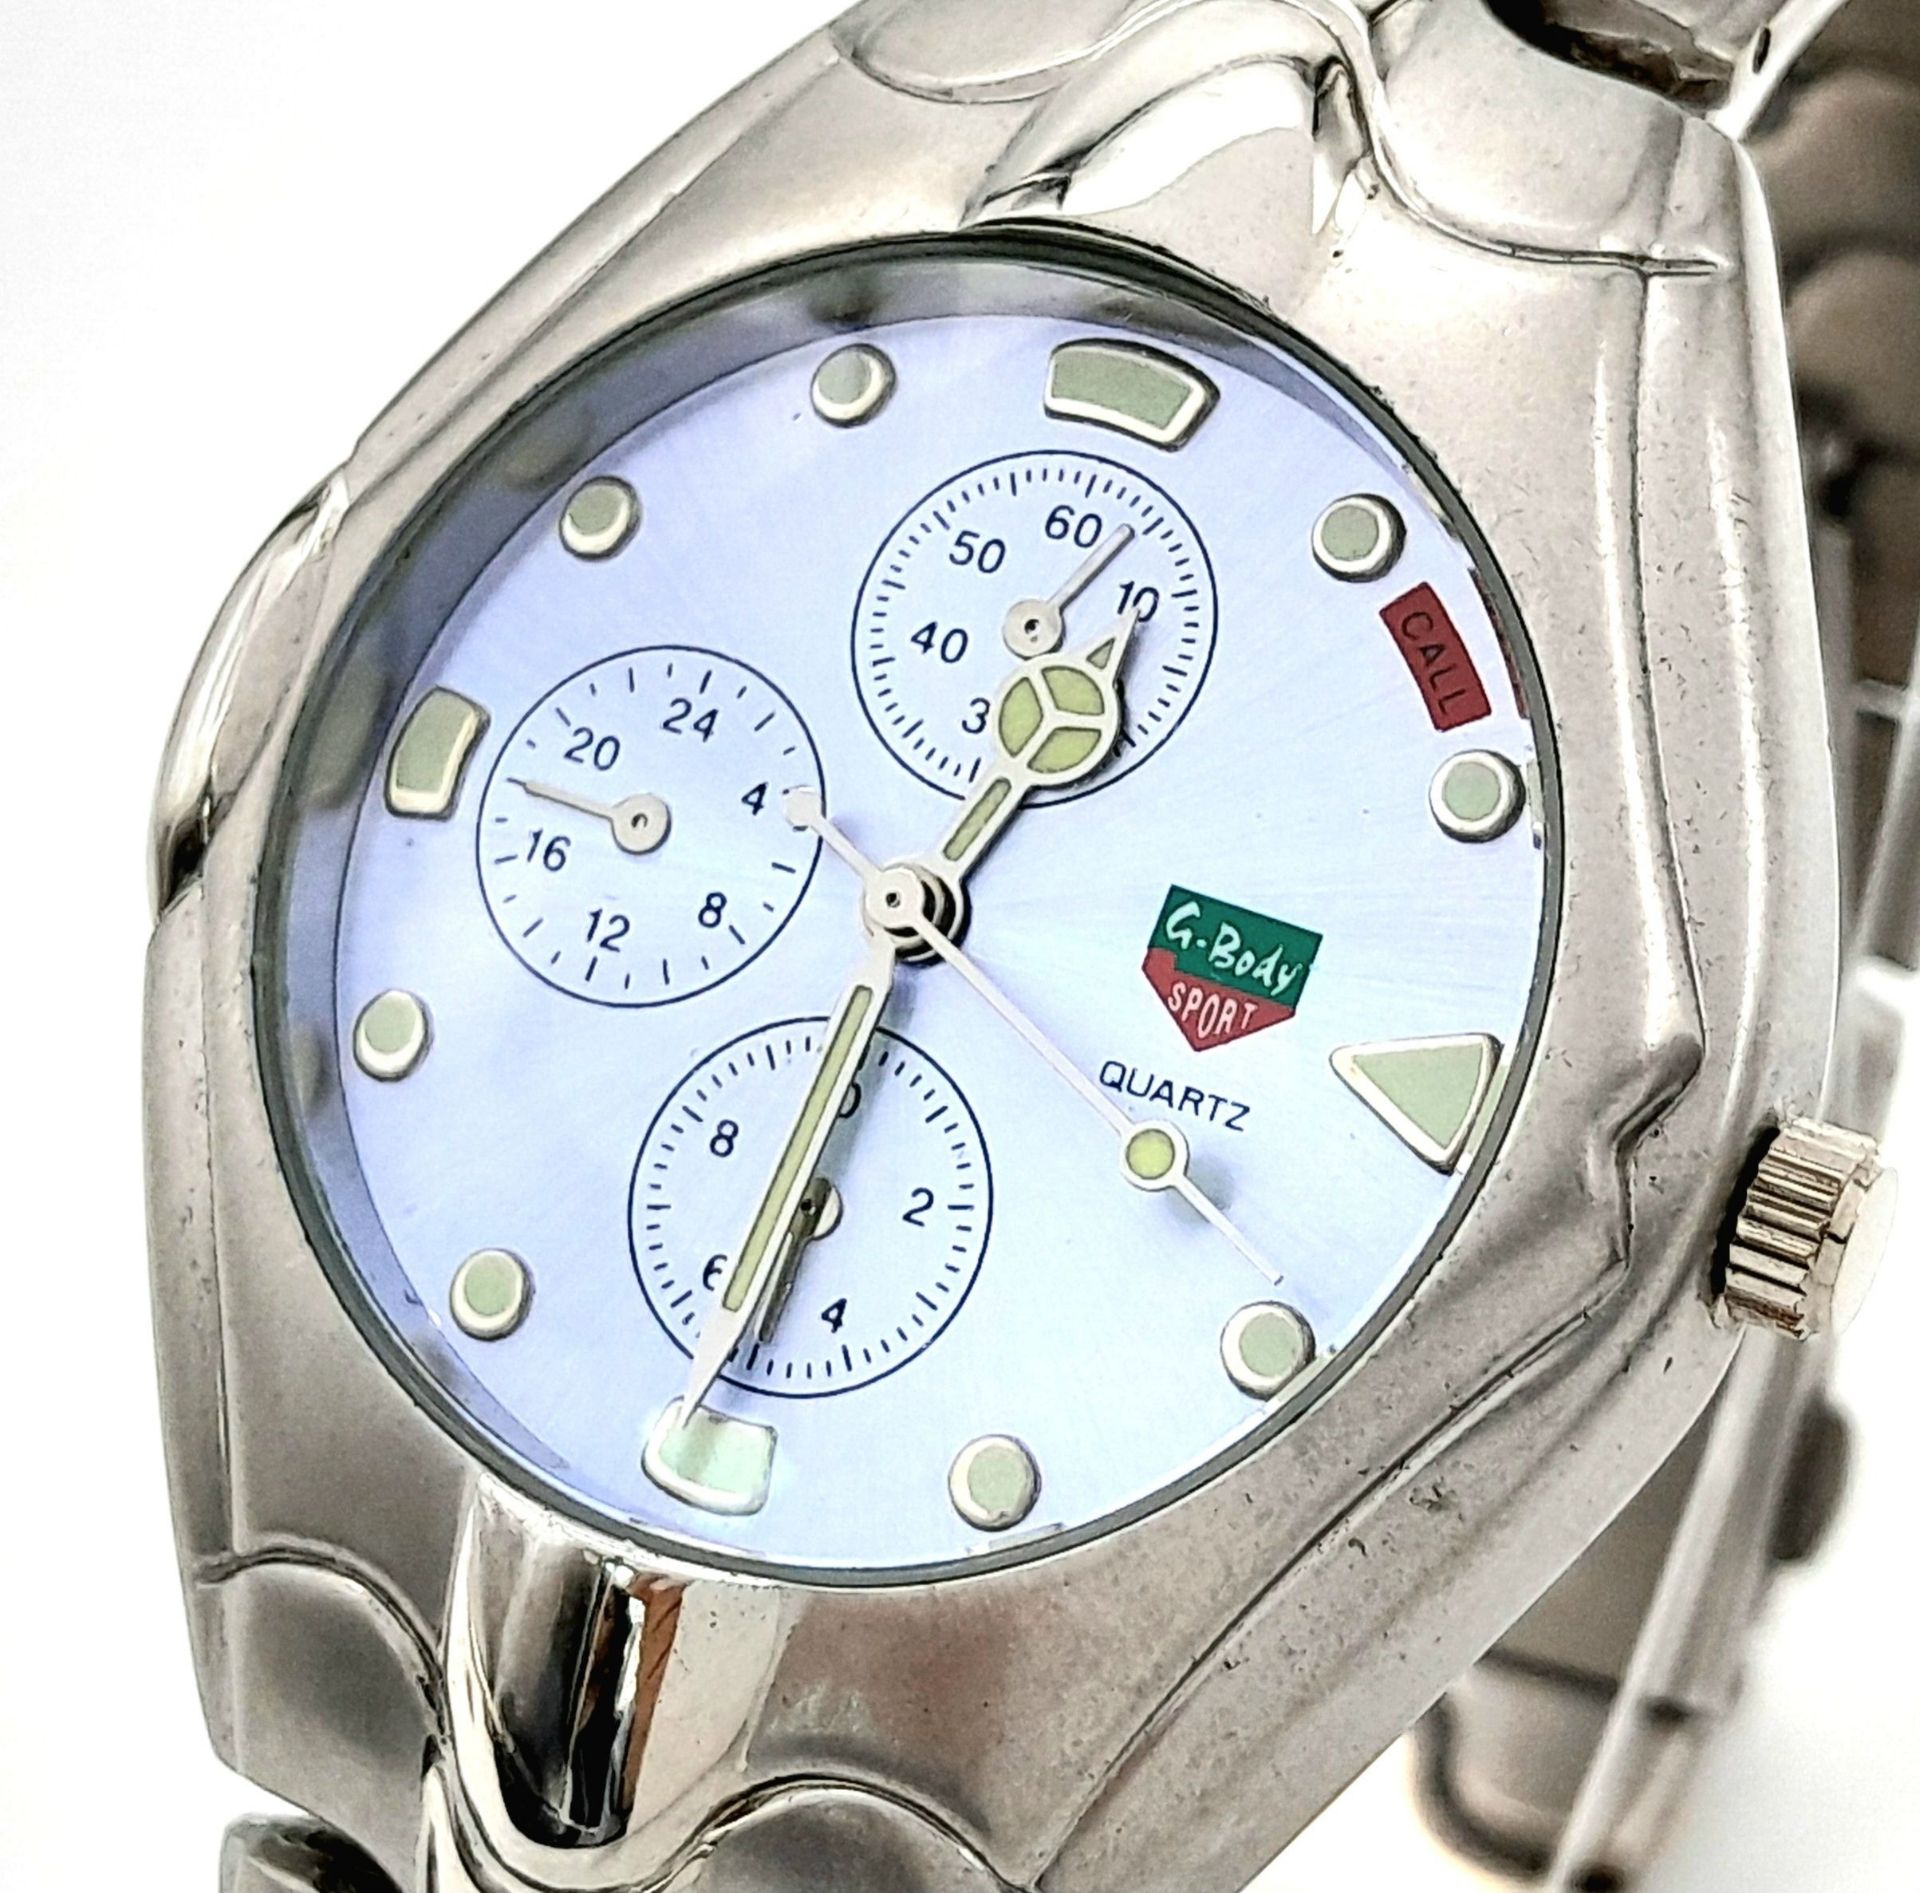 A Japanese G-Body Sports Quartz Watch (38mm Case). Full Working Order. - Image 2 of 6